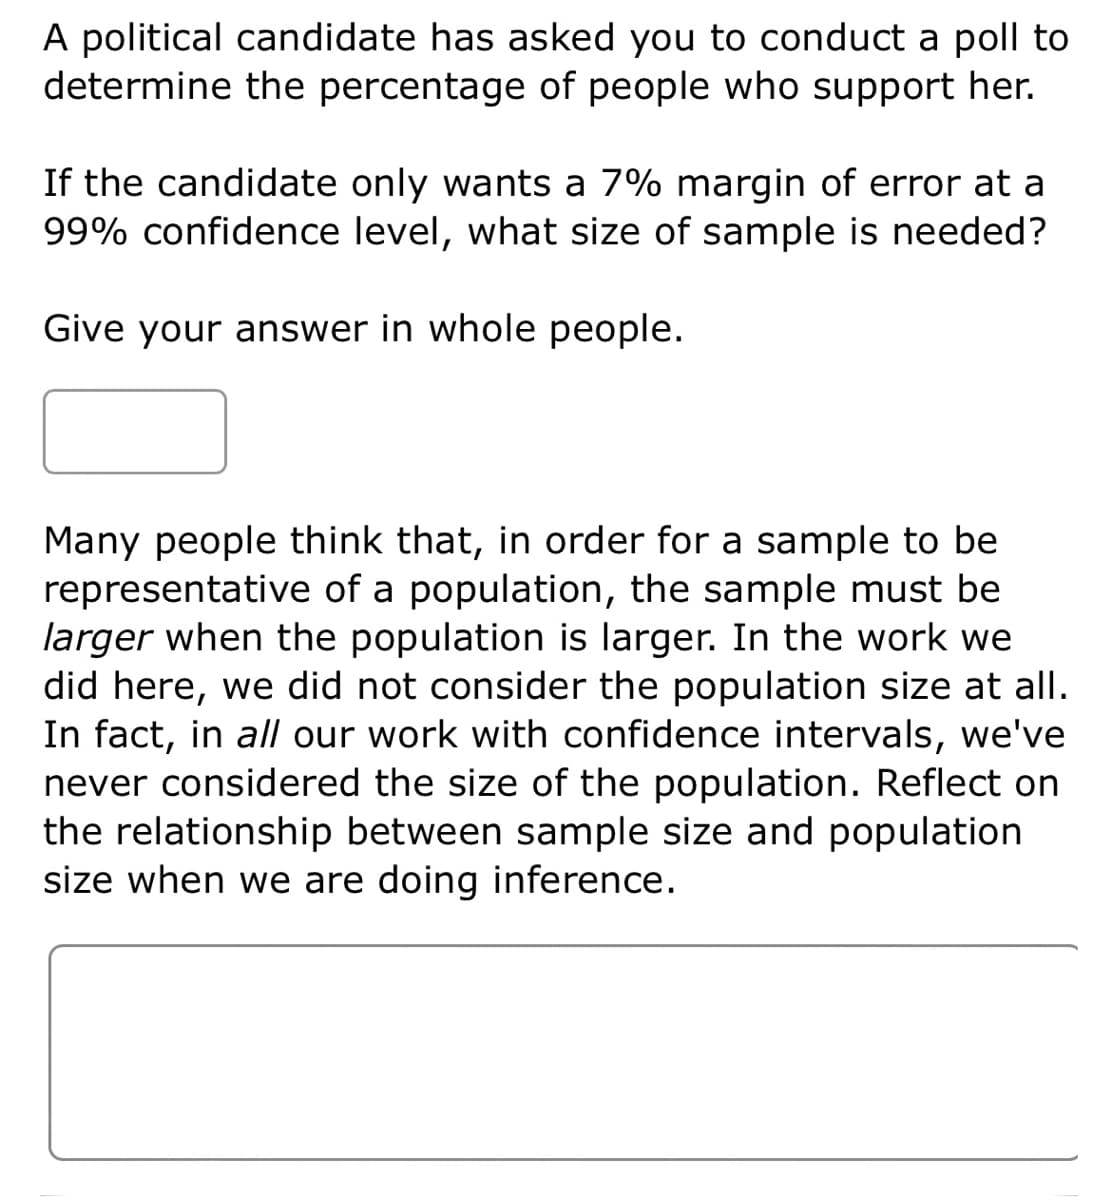 A political candidate has asked you to conduct a poll to
determine the percentage of people who support her.
If the candidate only wants a 7% margin of error at a
99% confidence level, what size of sample is needed?
Give your answer in whole people.
Many people think that, in order for a sample to be
representative of a population, the sample must be
larger when the population is larger. In the work we
did here, we did not consider the population size at all.
In fact, in all our work with confidence intervals, we've
never considered the size of the population. Reflect on
the relationship between sample size and population
size when we are doing inference.